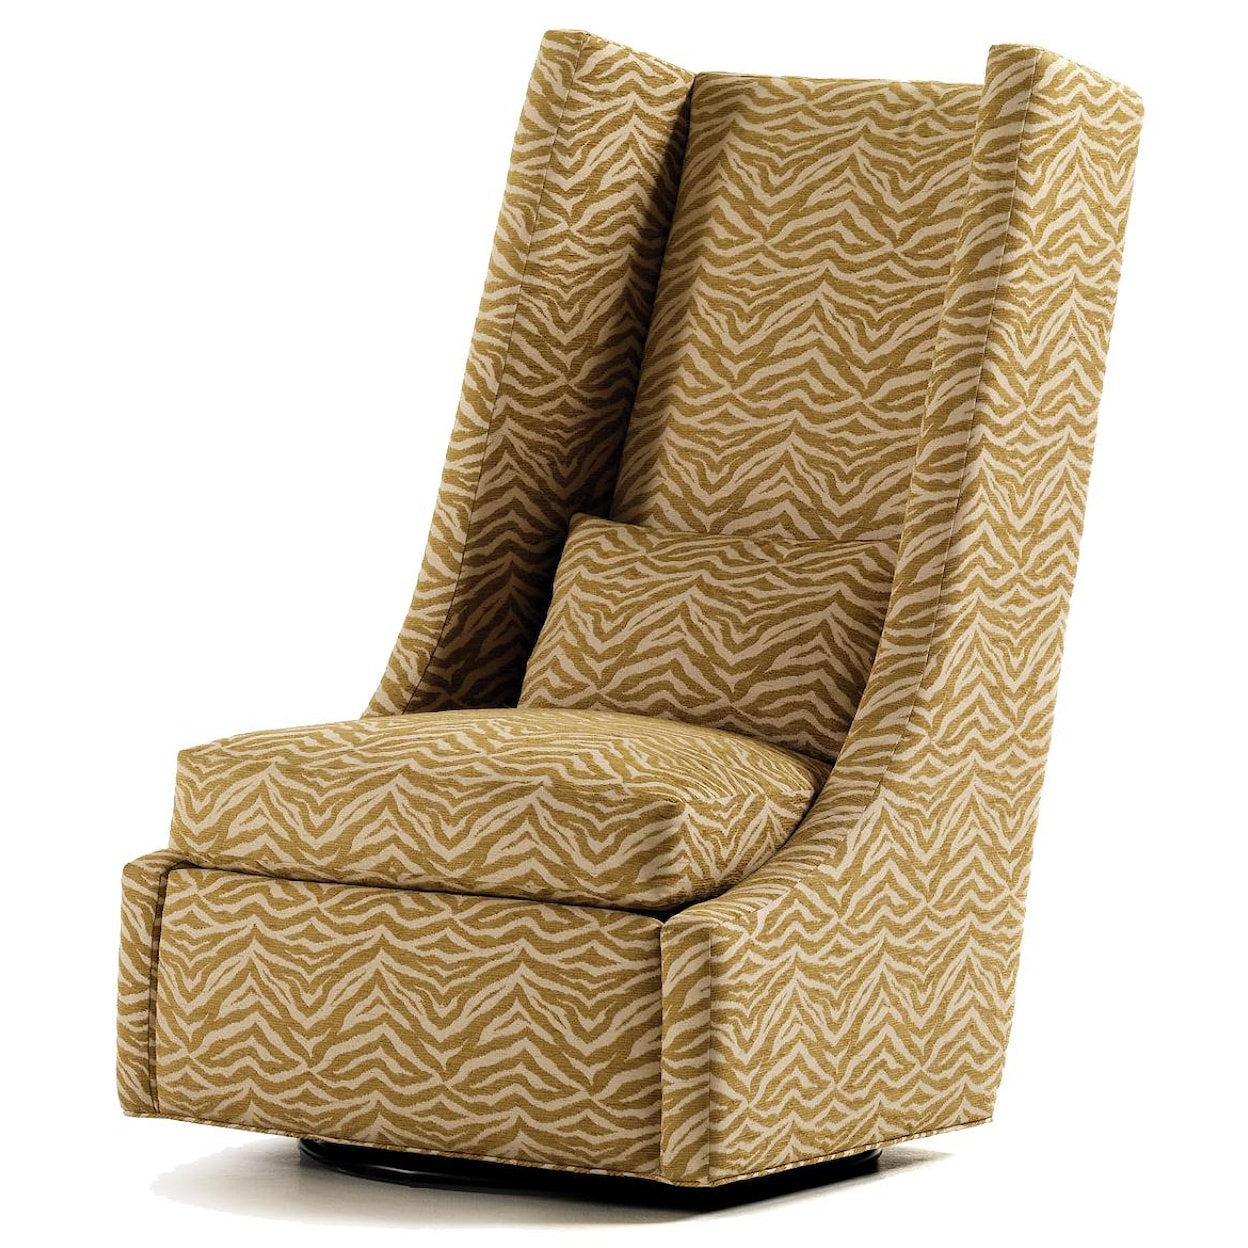 Jessica Charles Fine Upholstered Accents Redmond Swivel Chair